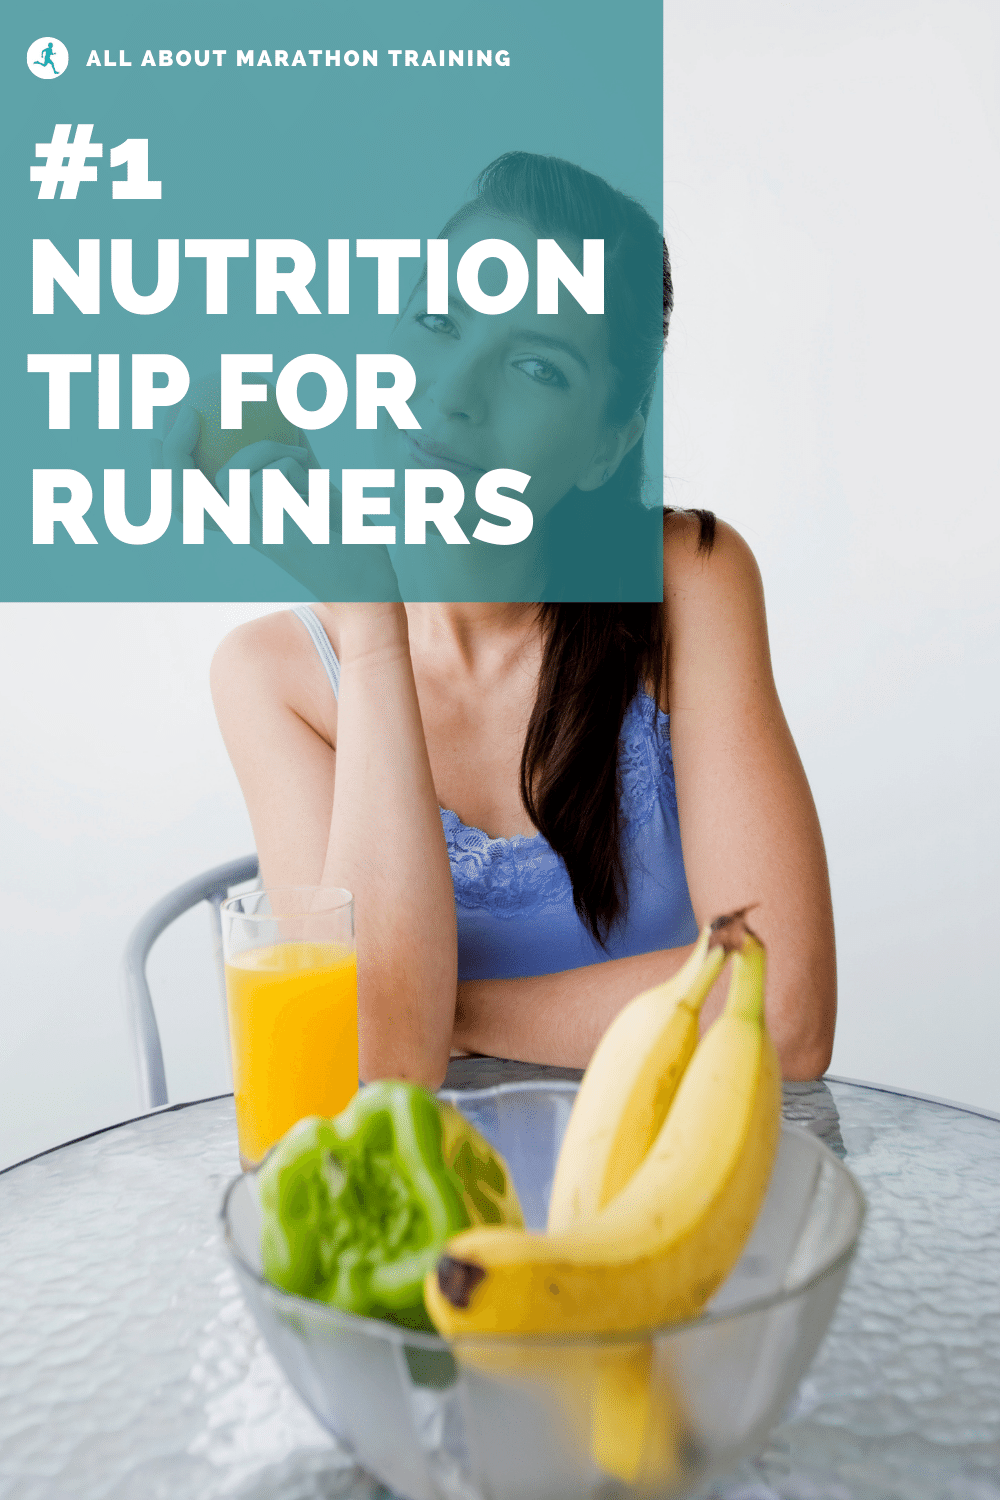 Marathon Nutrition: Evaluating your Diet for Successful Running